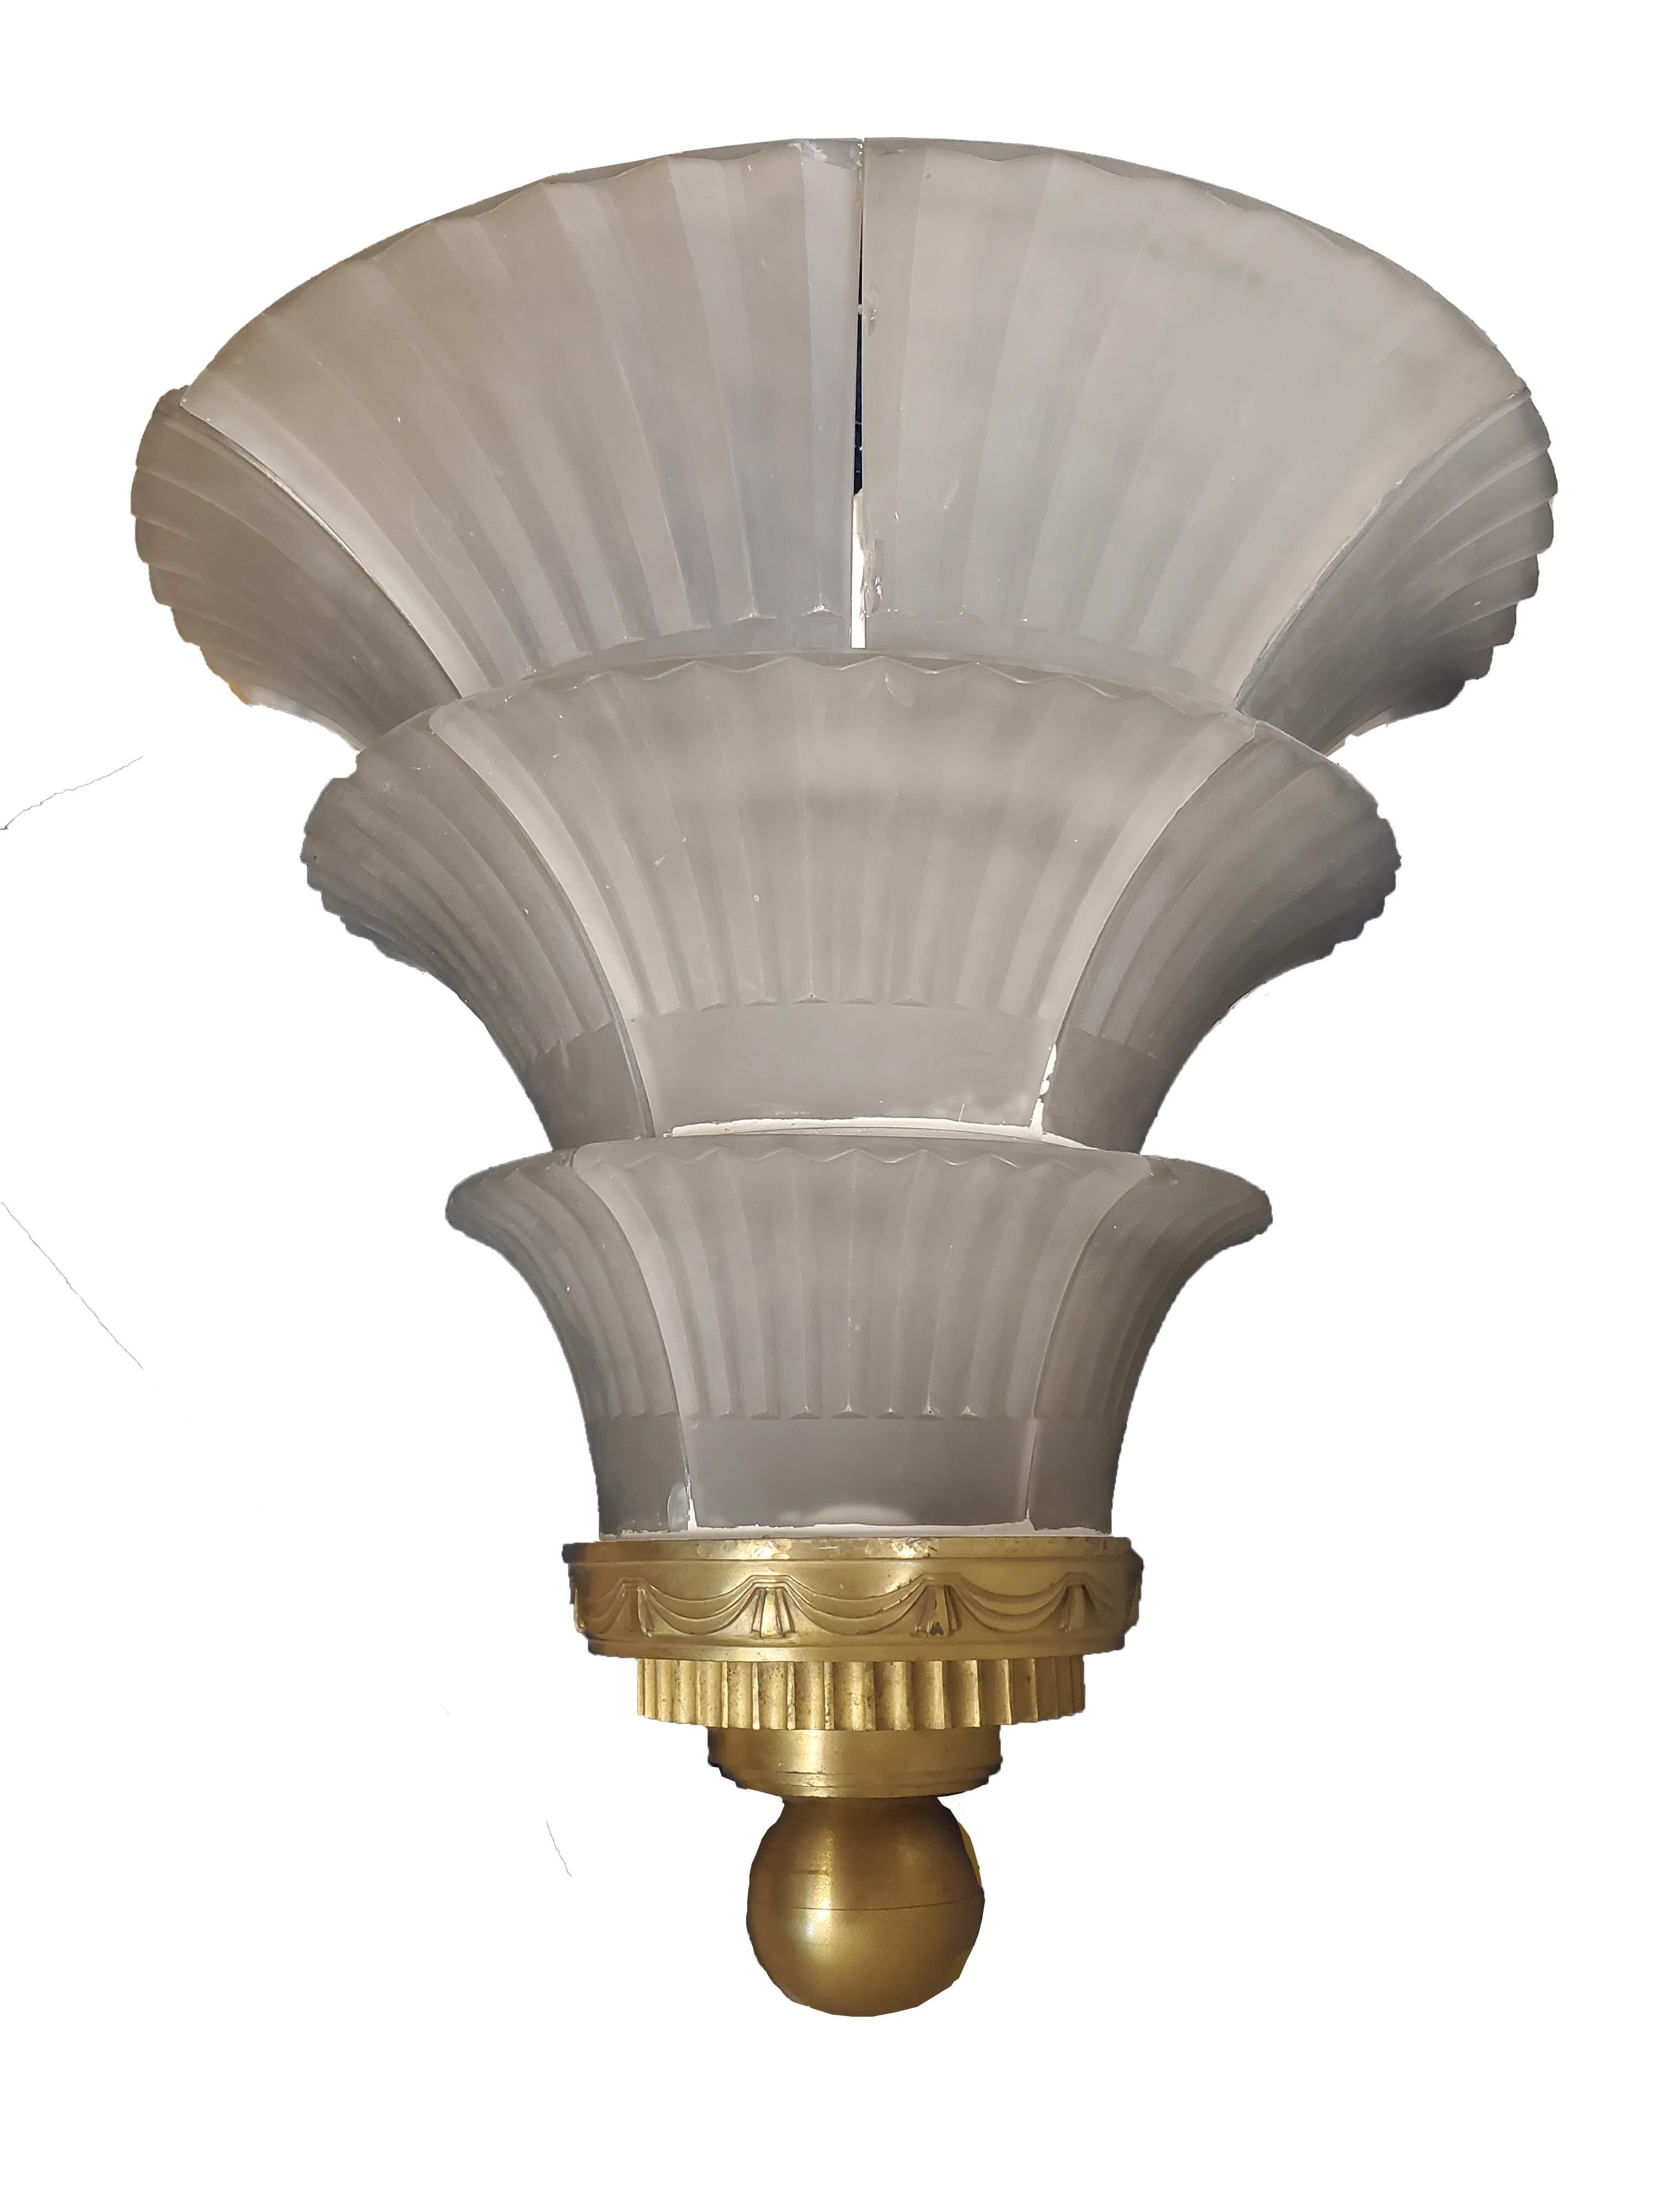 These palatial and magnificent original French Art Deco sconces are truly a work of art. The elegant fluted design of the ten frosted art glass panels cascade down in three tiers, creating a stunning visual reminiscent of a waterfall. 
The